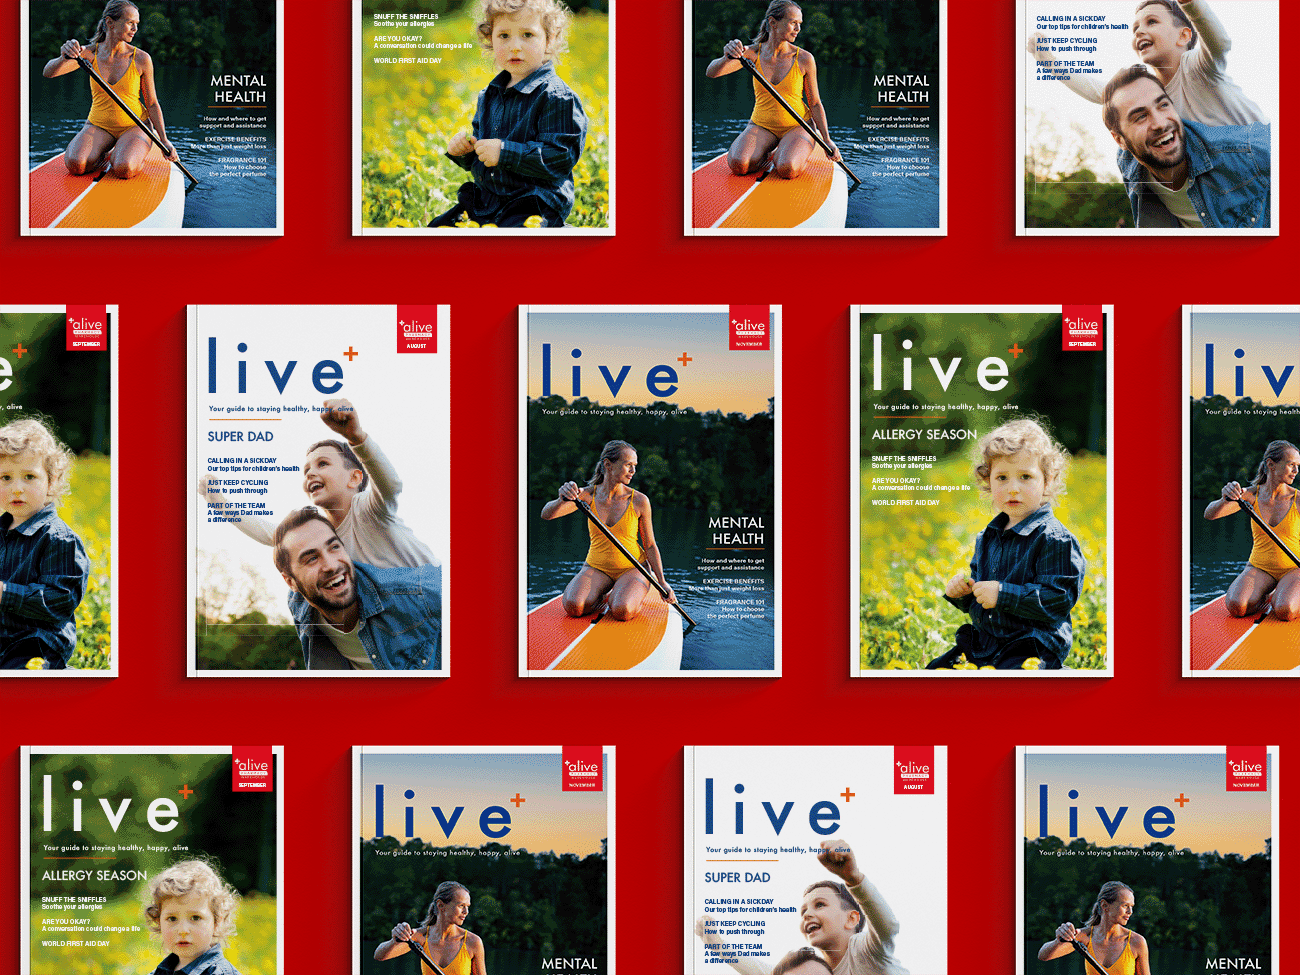 Alive Pharmacy Live+ catalogues